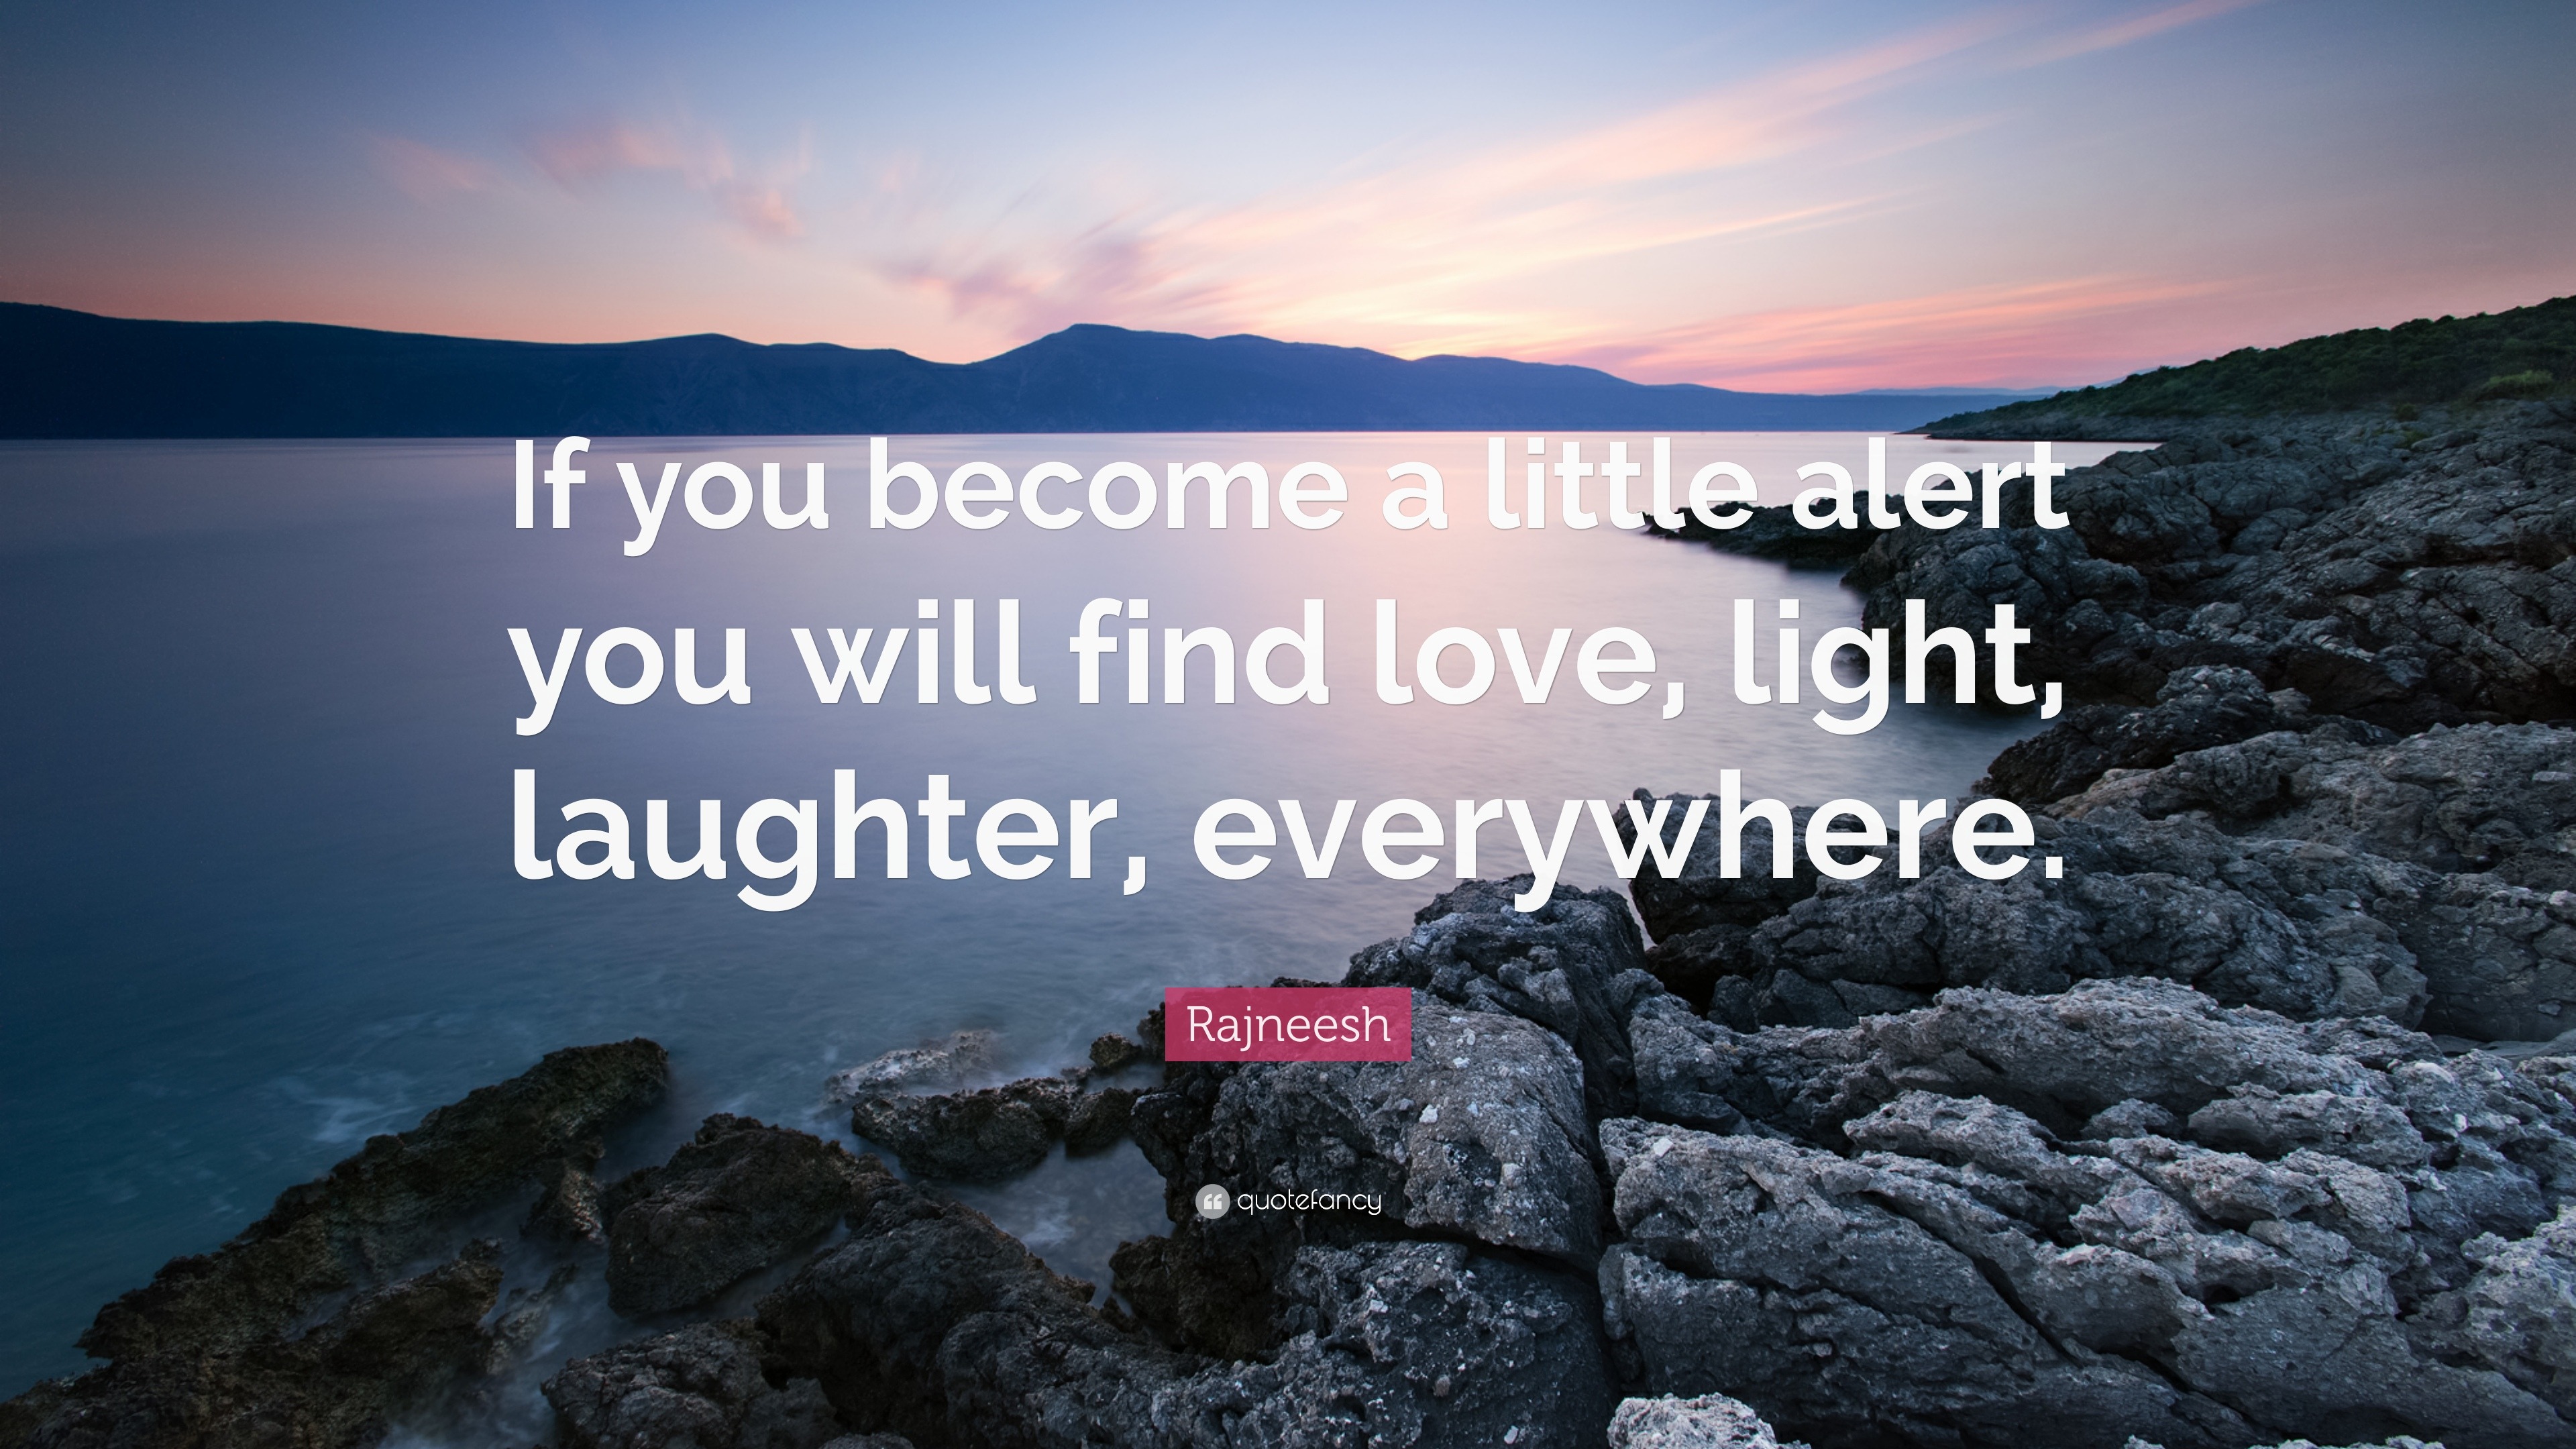 Rajneesh Quote “If you be e a little alert you will find love light